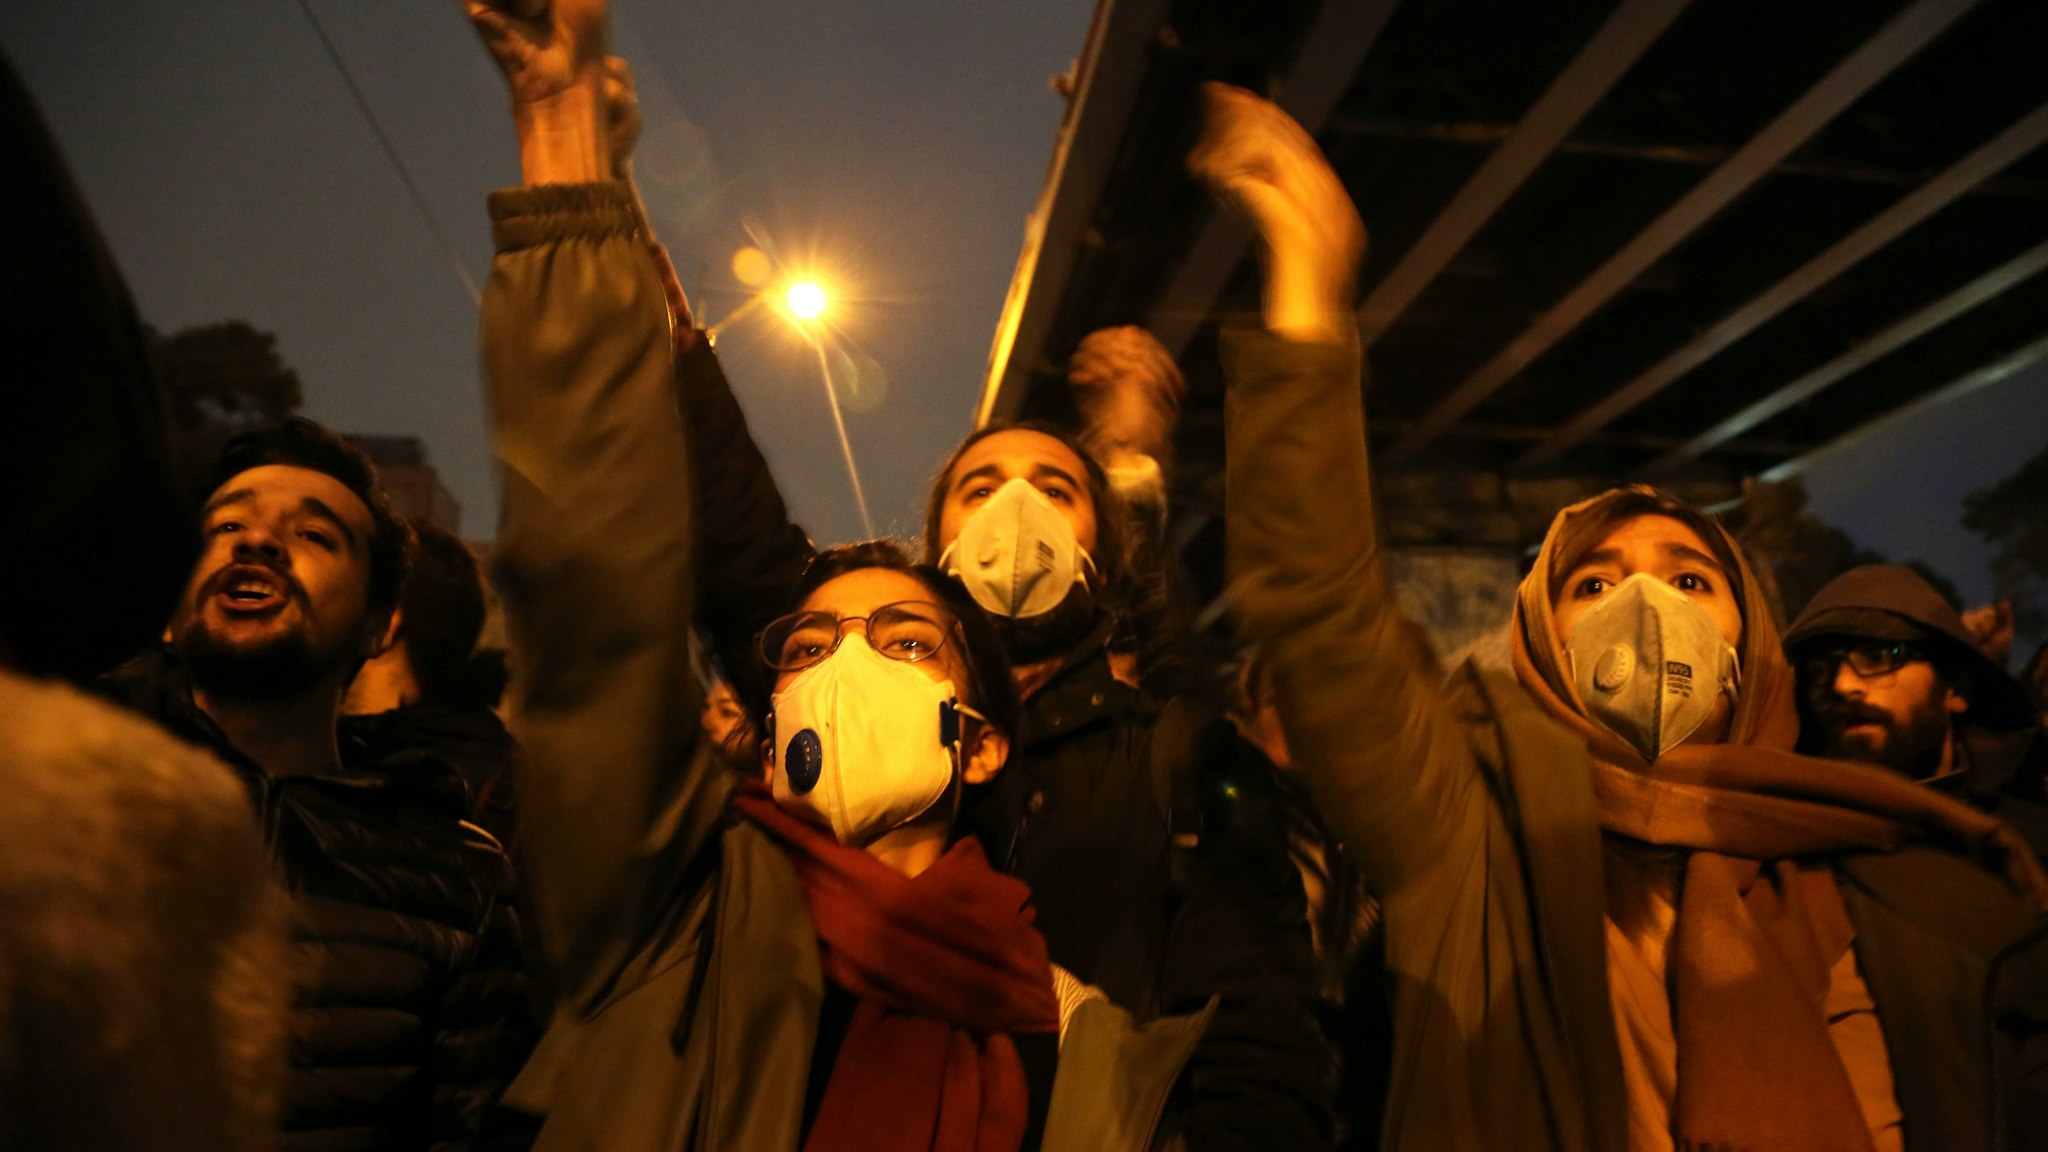 TEHRAN, IRAN - JANUARY 11 : Iranians shout slogans against the government after a vigil held for the victims of the airplane of Ukrainian International Airlines that crashed near Imam Khomeini Airport turned into an anti-government protest outside Amirkabir University in Tehran, Iran on January 11, 2020.